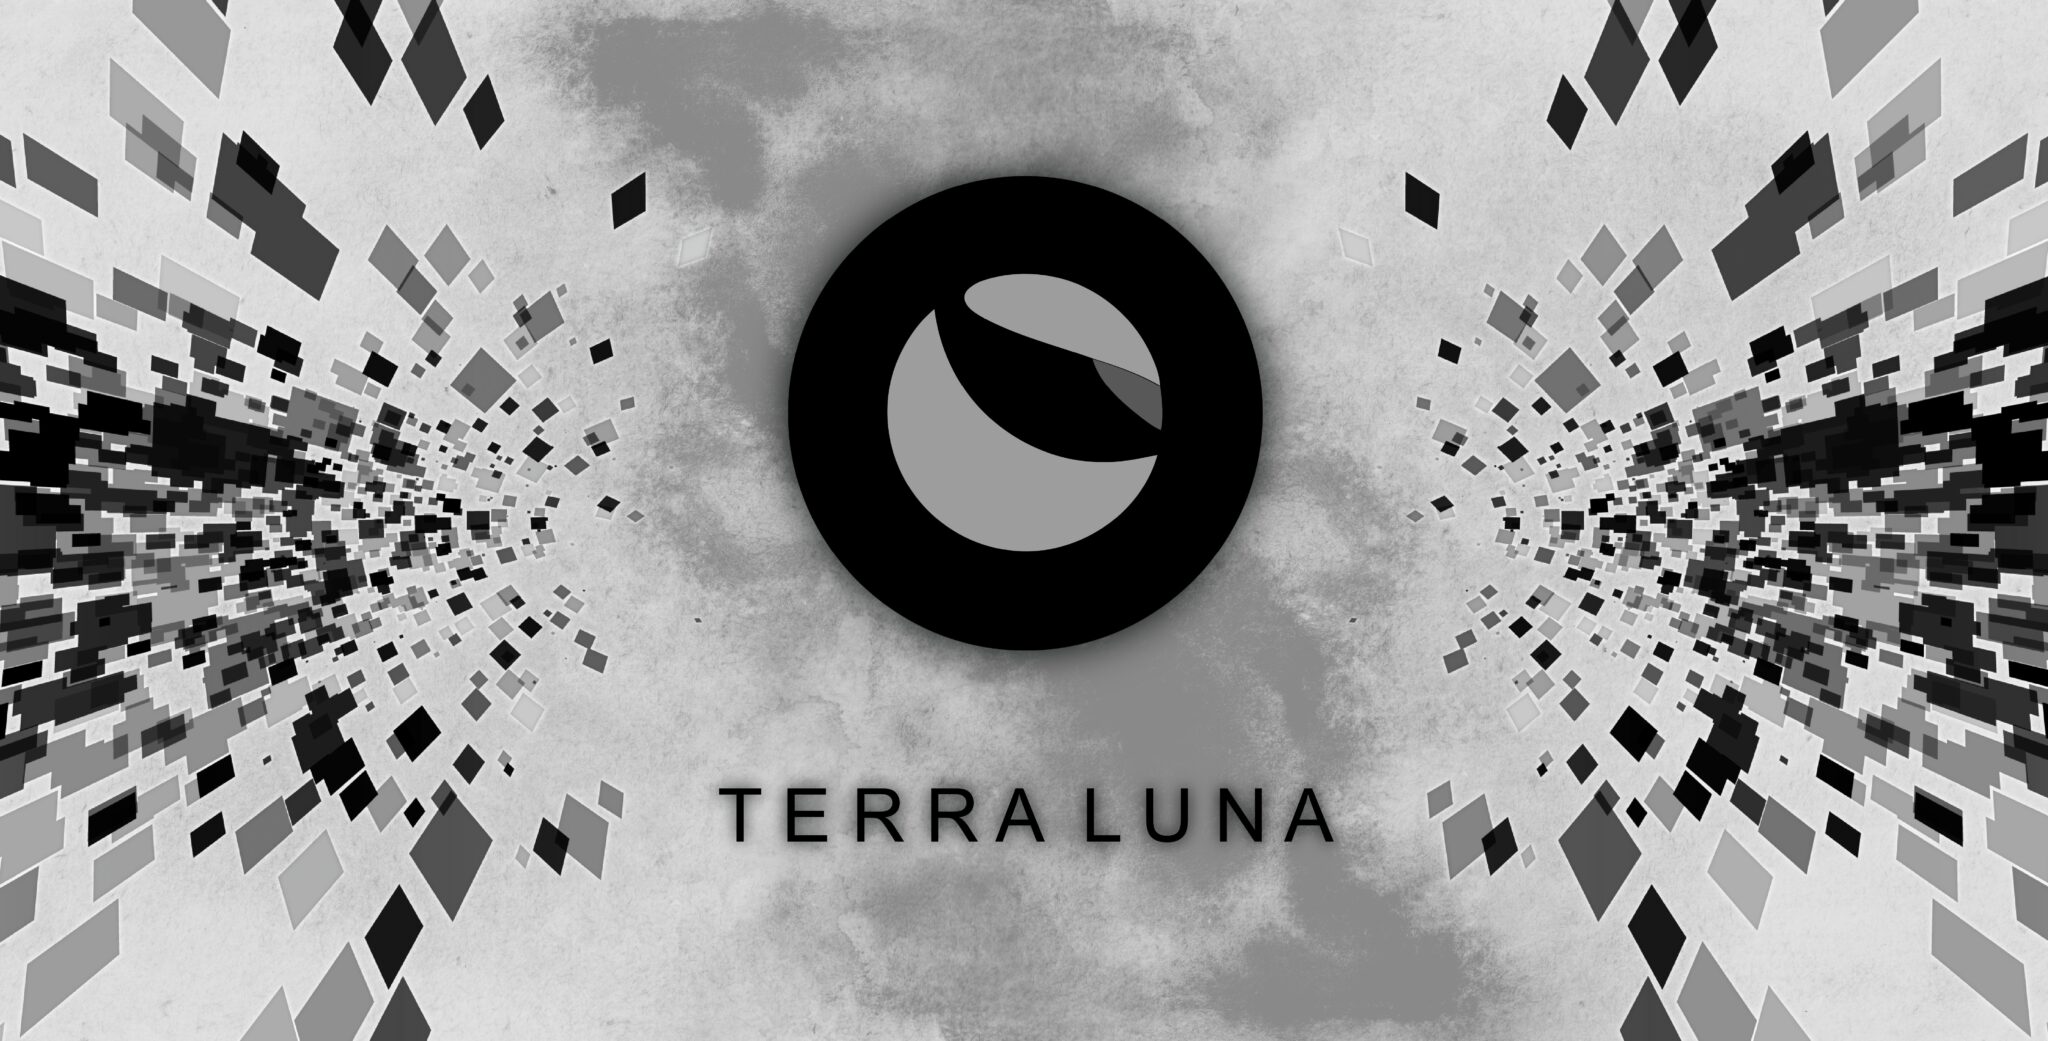 Terra Luna crypto currency. Luna on abstract background.